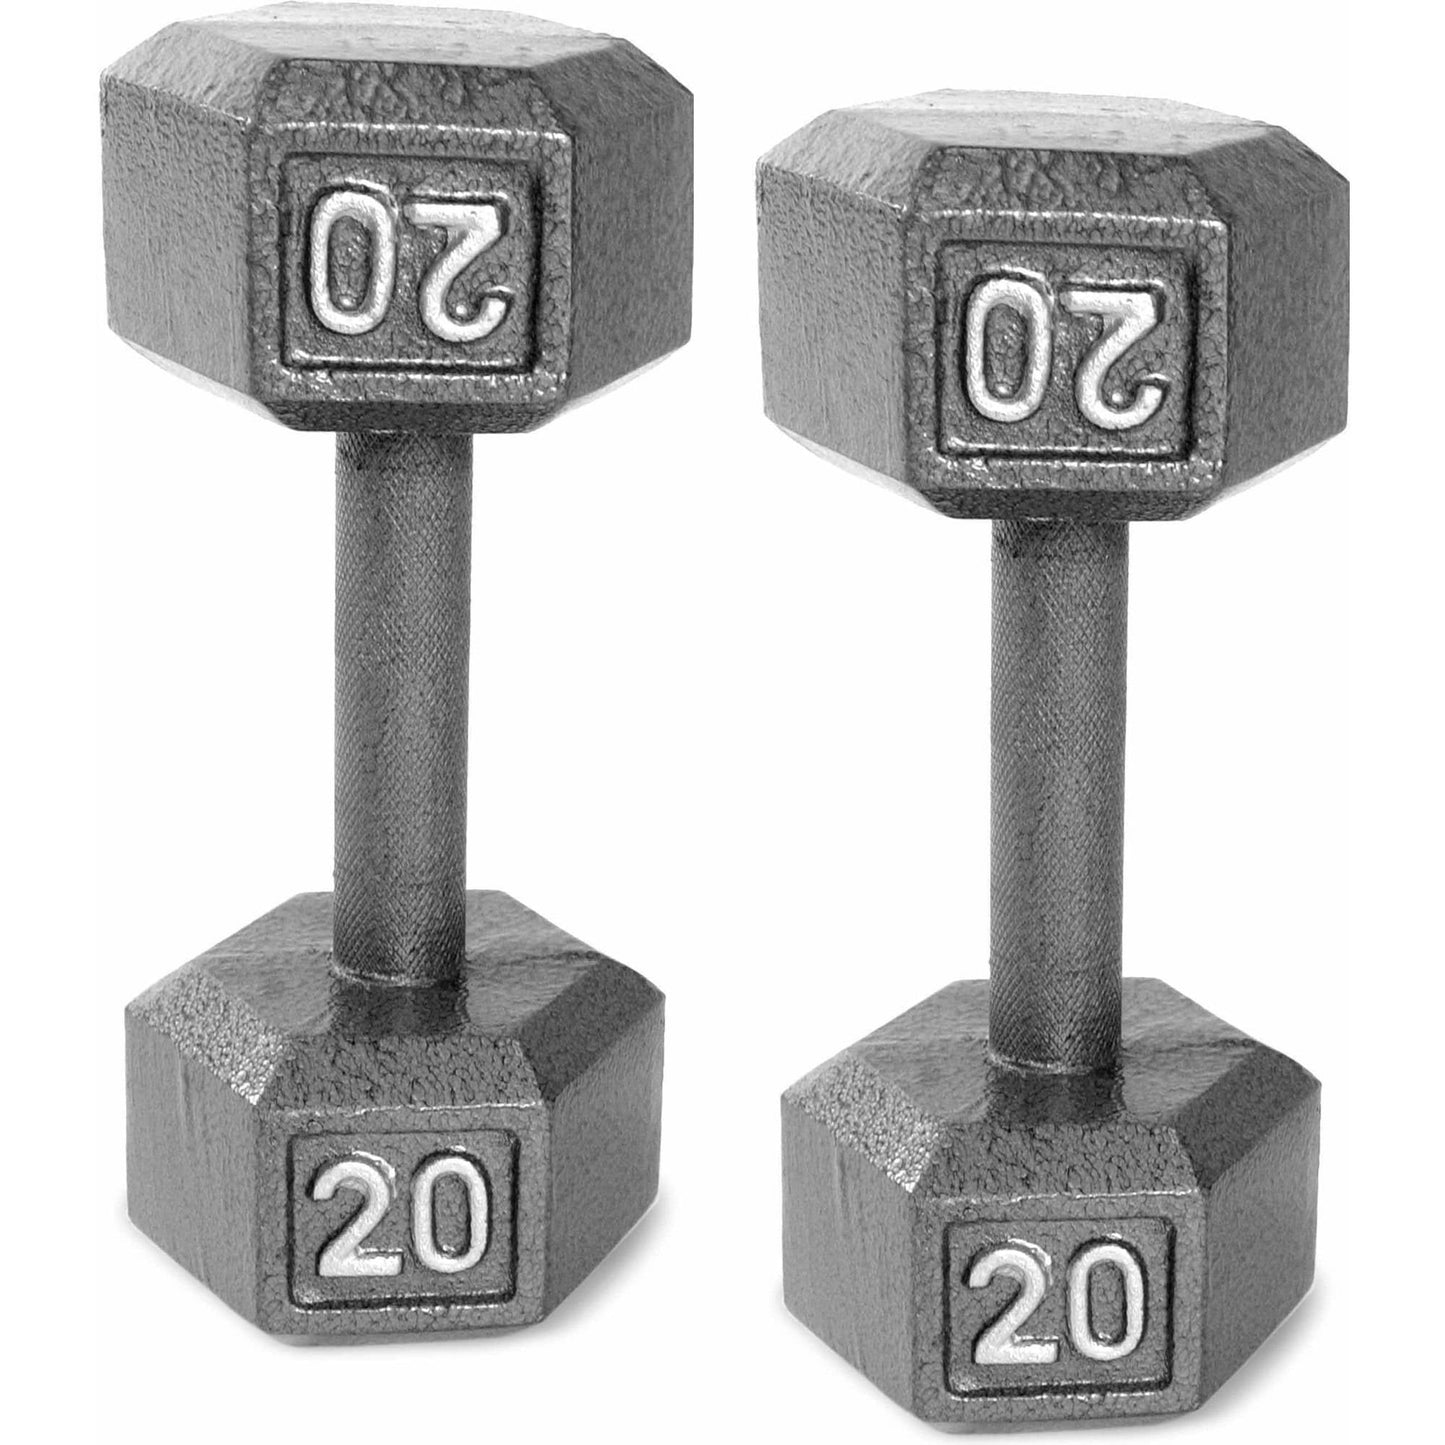 Pair of Cast Iron 25 LBS Dumbbells